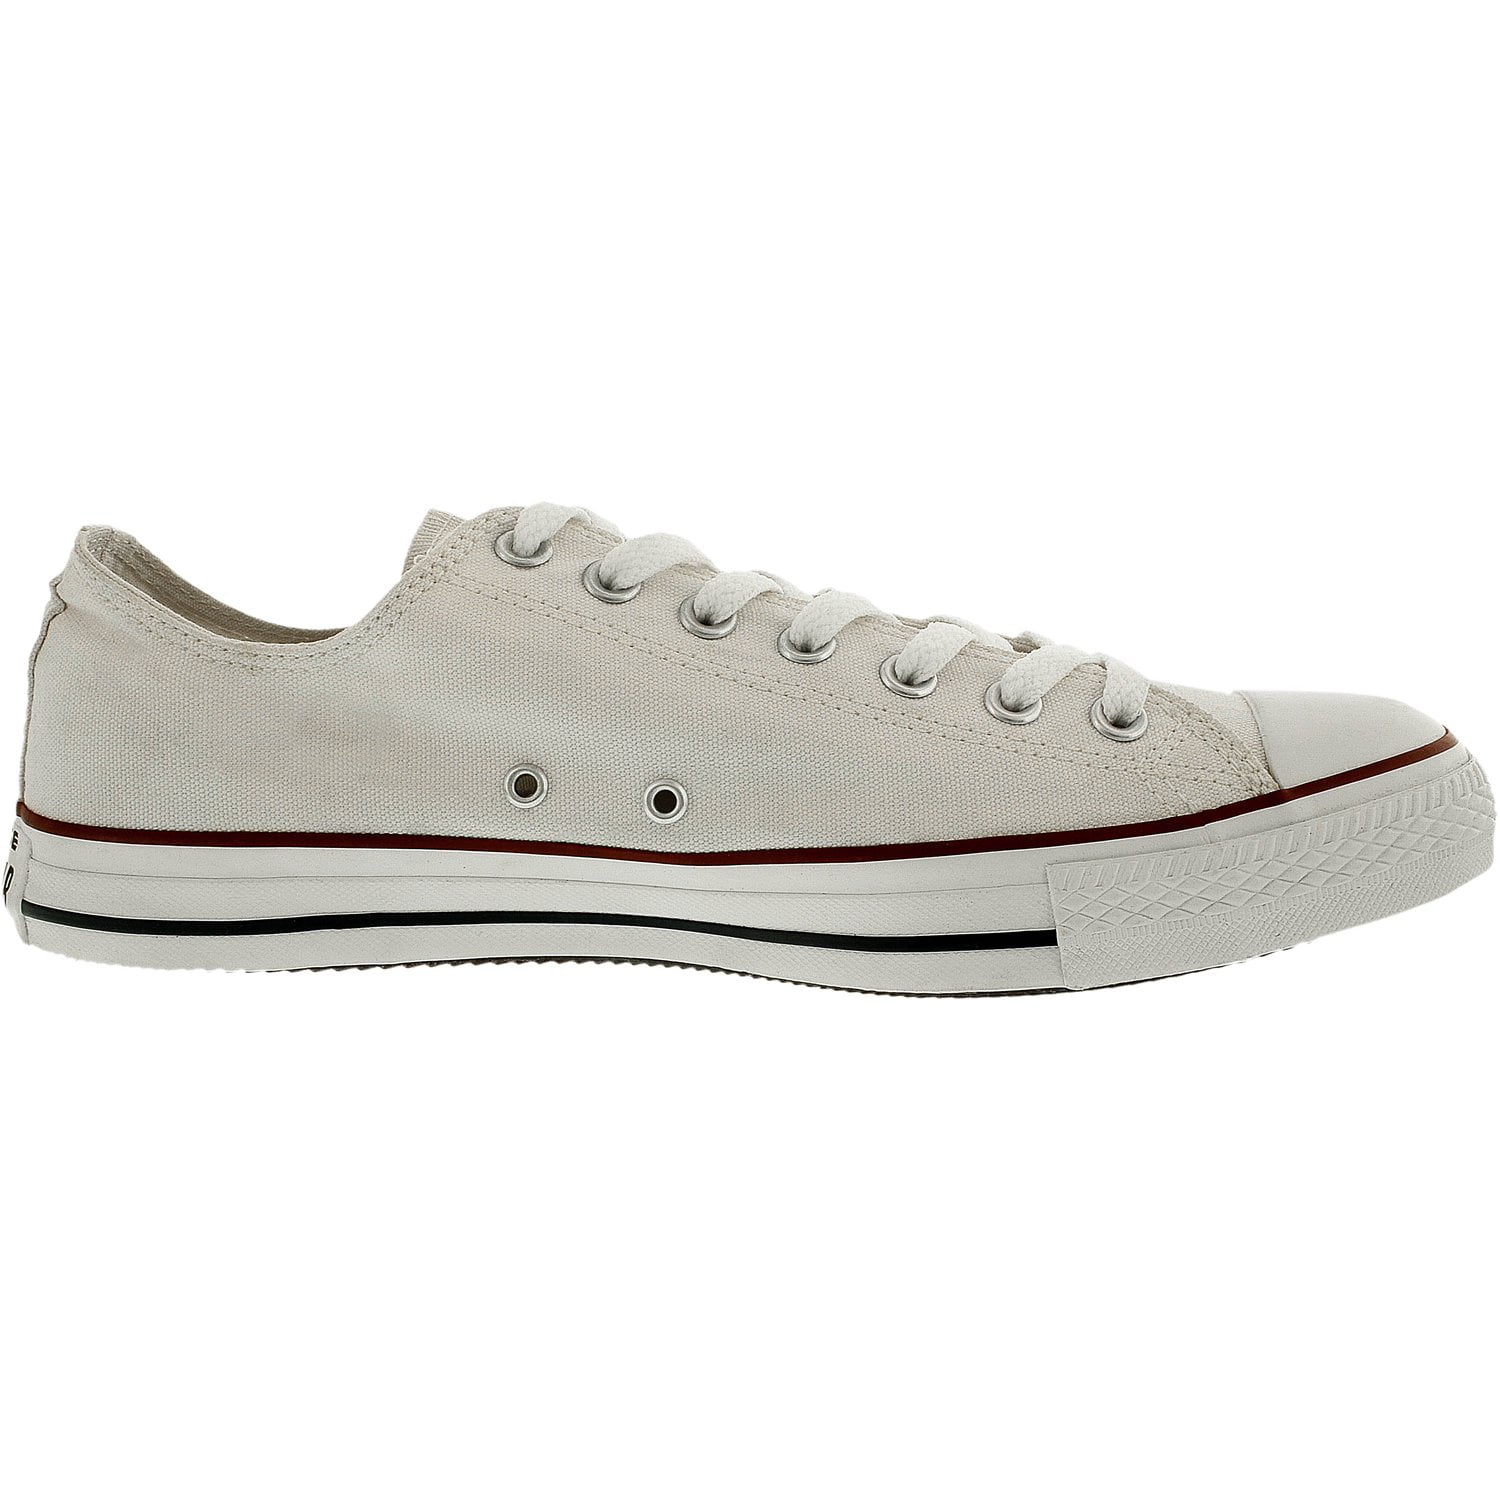 Converse Chuck Taylor All Star Core Low Top Canvas White Ankle-High ...